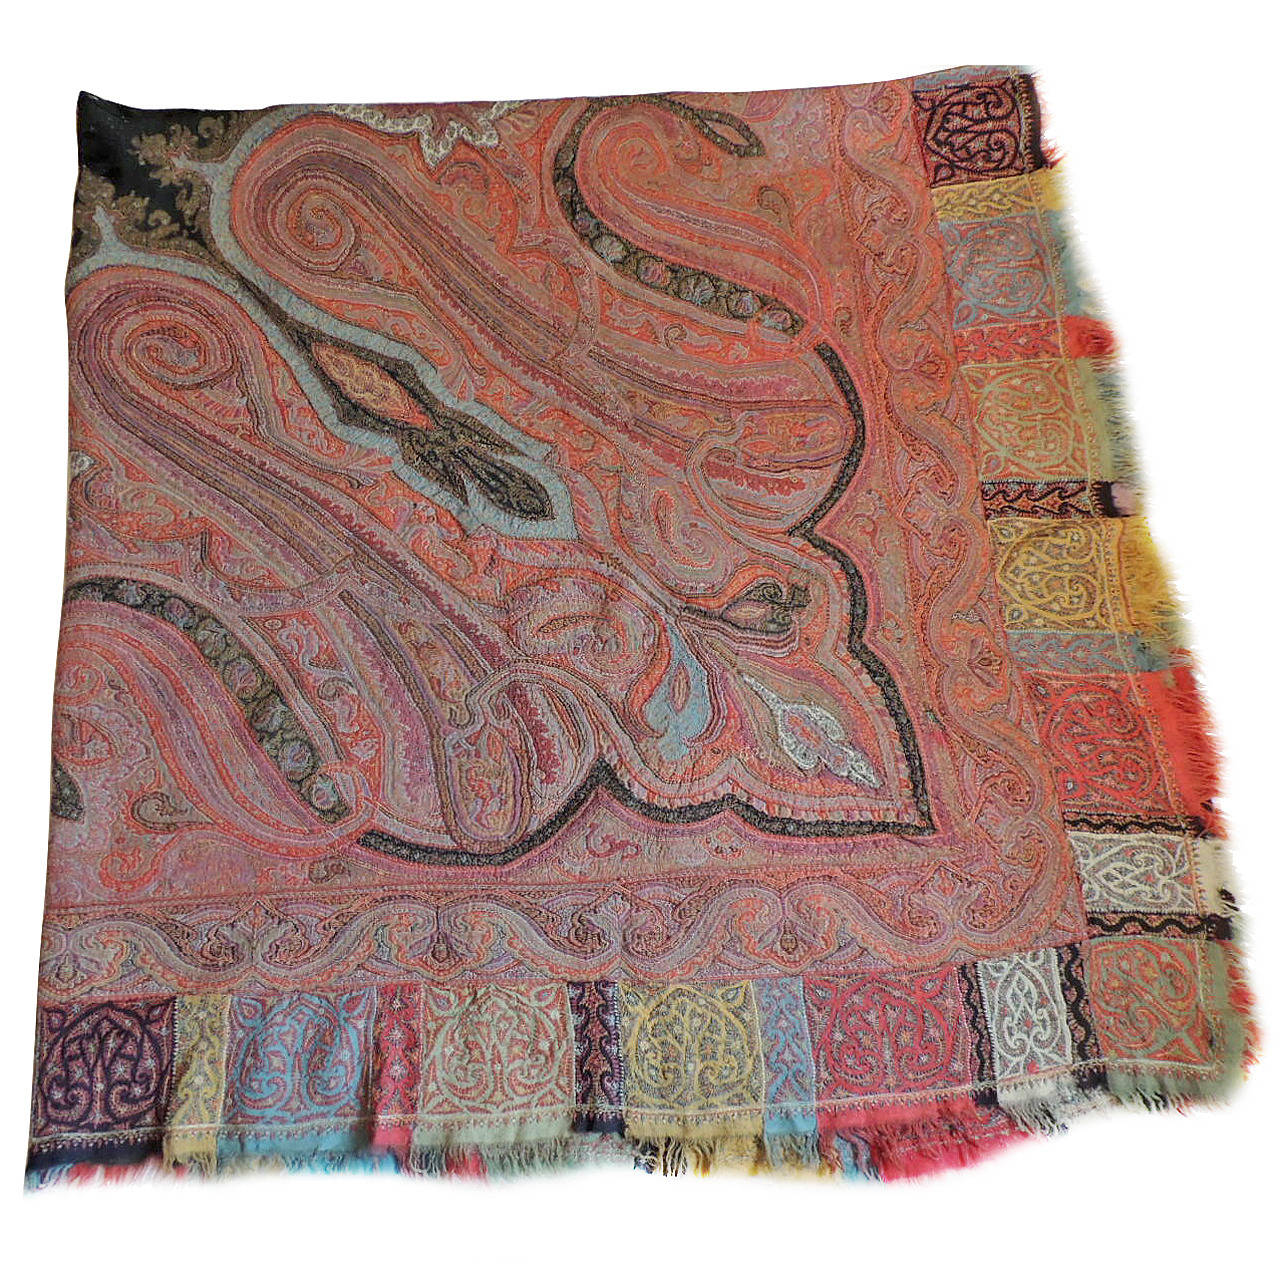 Antique Textiles Galleries:
Large Kashmir embroidered paisley coverlet/throw/cloth/shawl with dark wool and backing; boteh border all around. Needlework technic known as Rafugars;
Separately woven and joined to the field, center medallion in dark